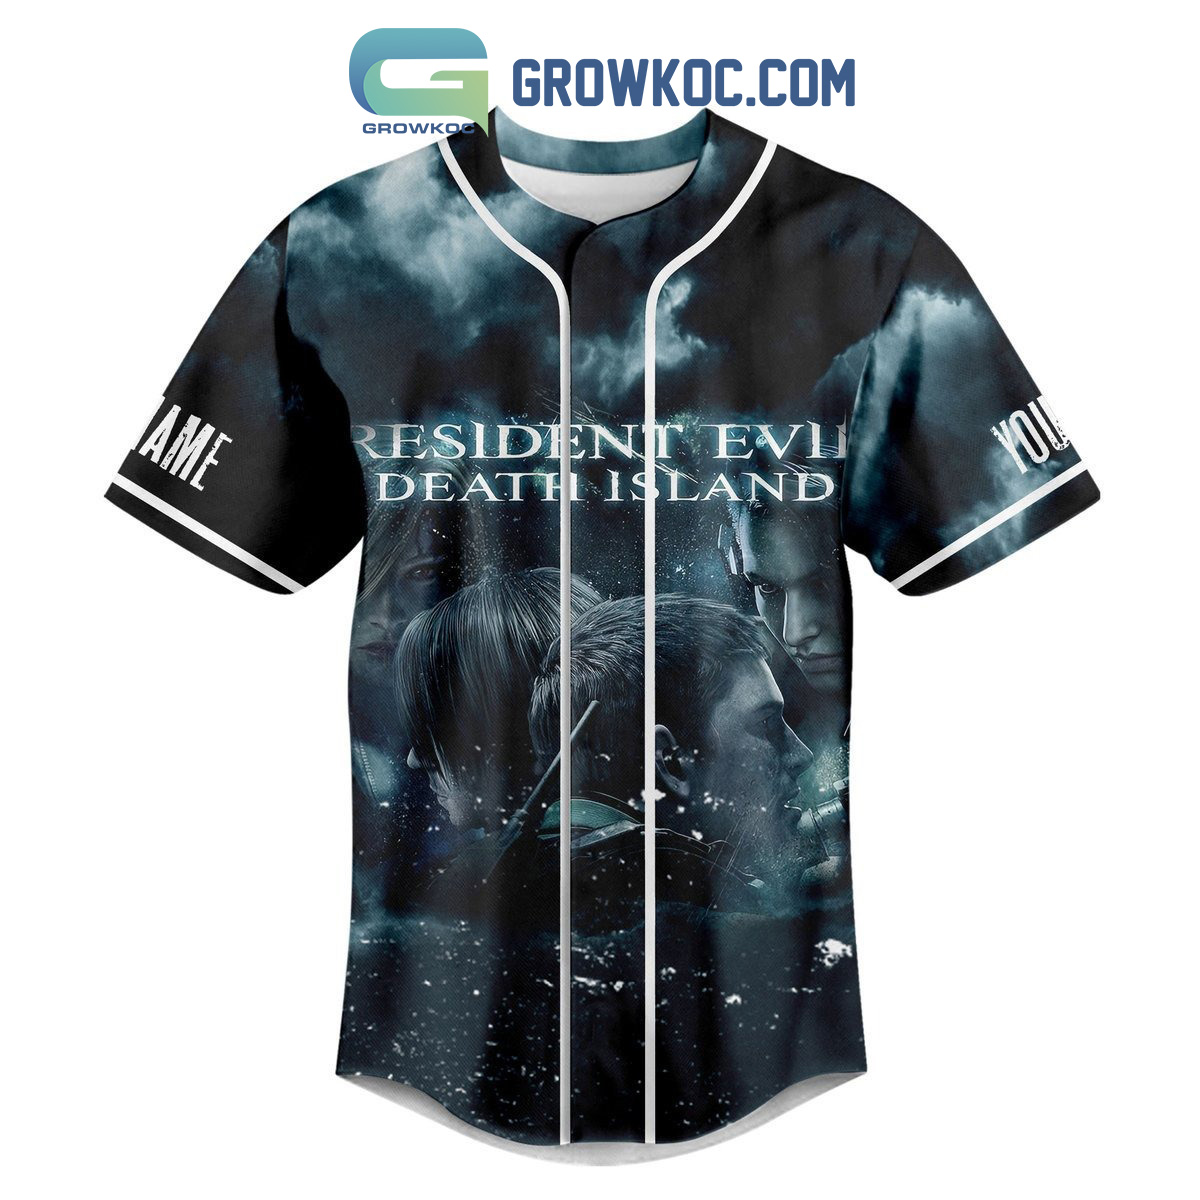 Resident Evil Death Island Personalized Baseball Jersey